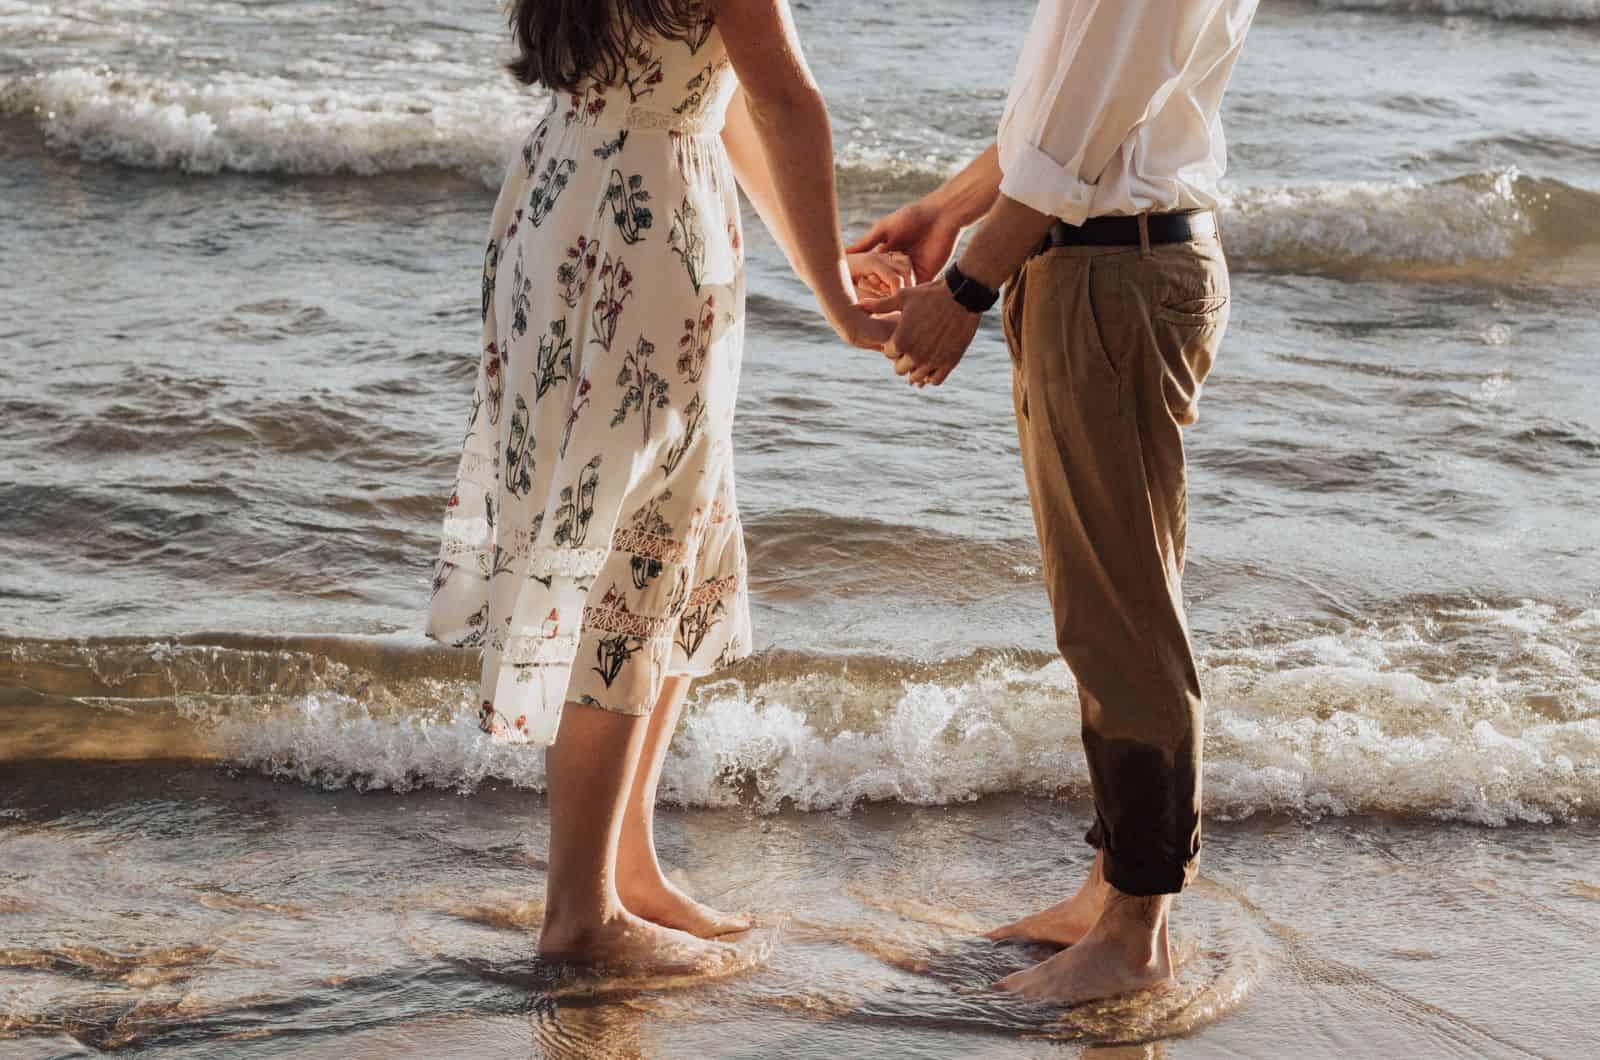 couple holding hands in water